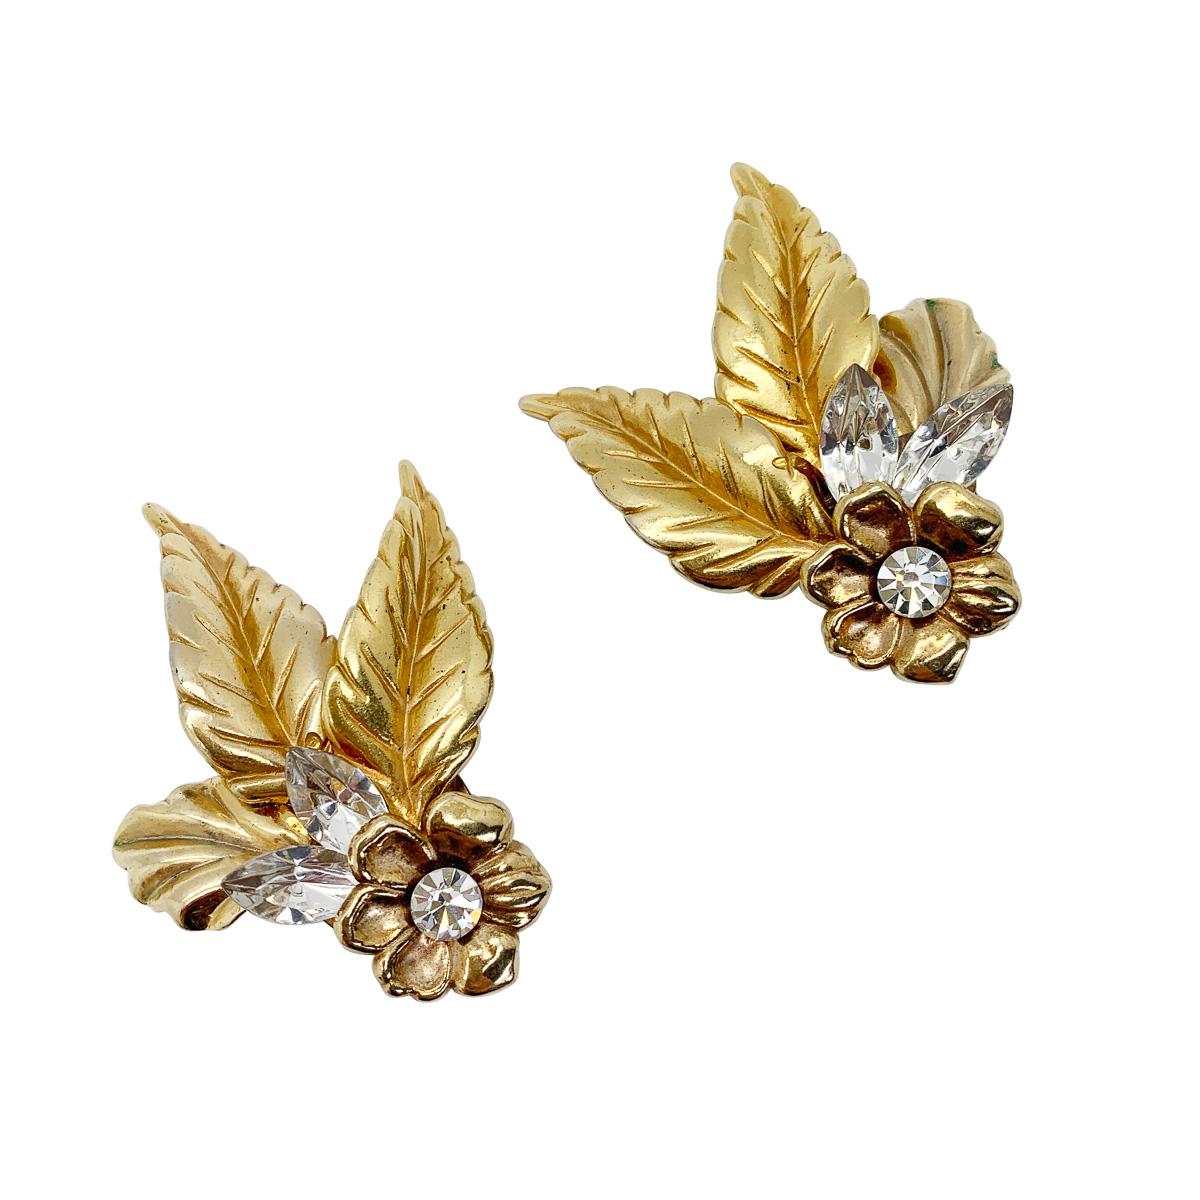 Fabulous Vintage Crystal Leaf Earrings featuring the gorgeous detailing and finished with marquise and chaton crystals. A stunning vintage earring that will give you heritage style with a modern and edgy vibe.

Vintage Condition: Very good without